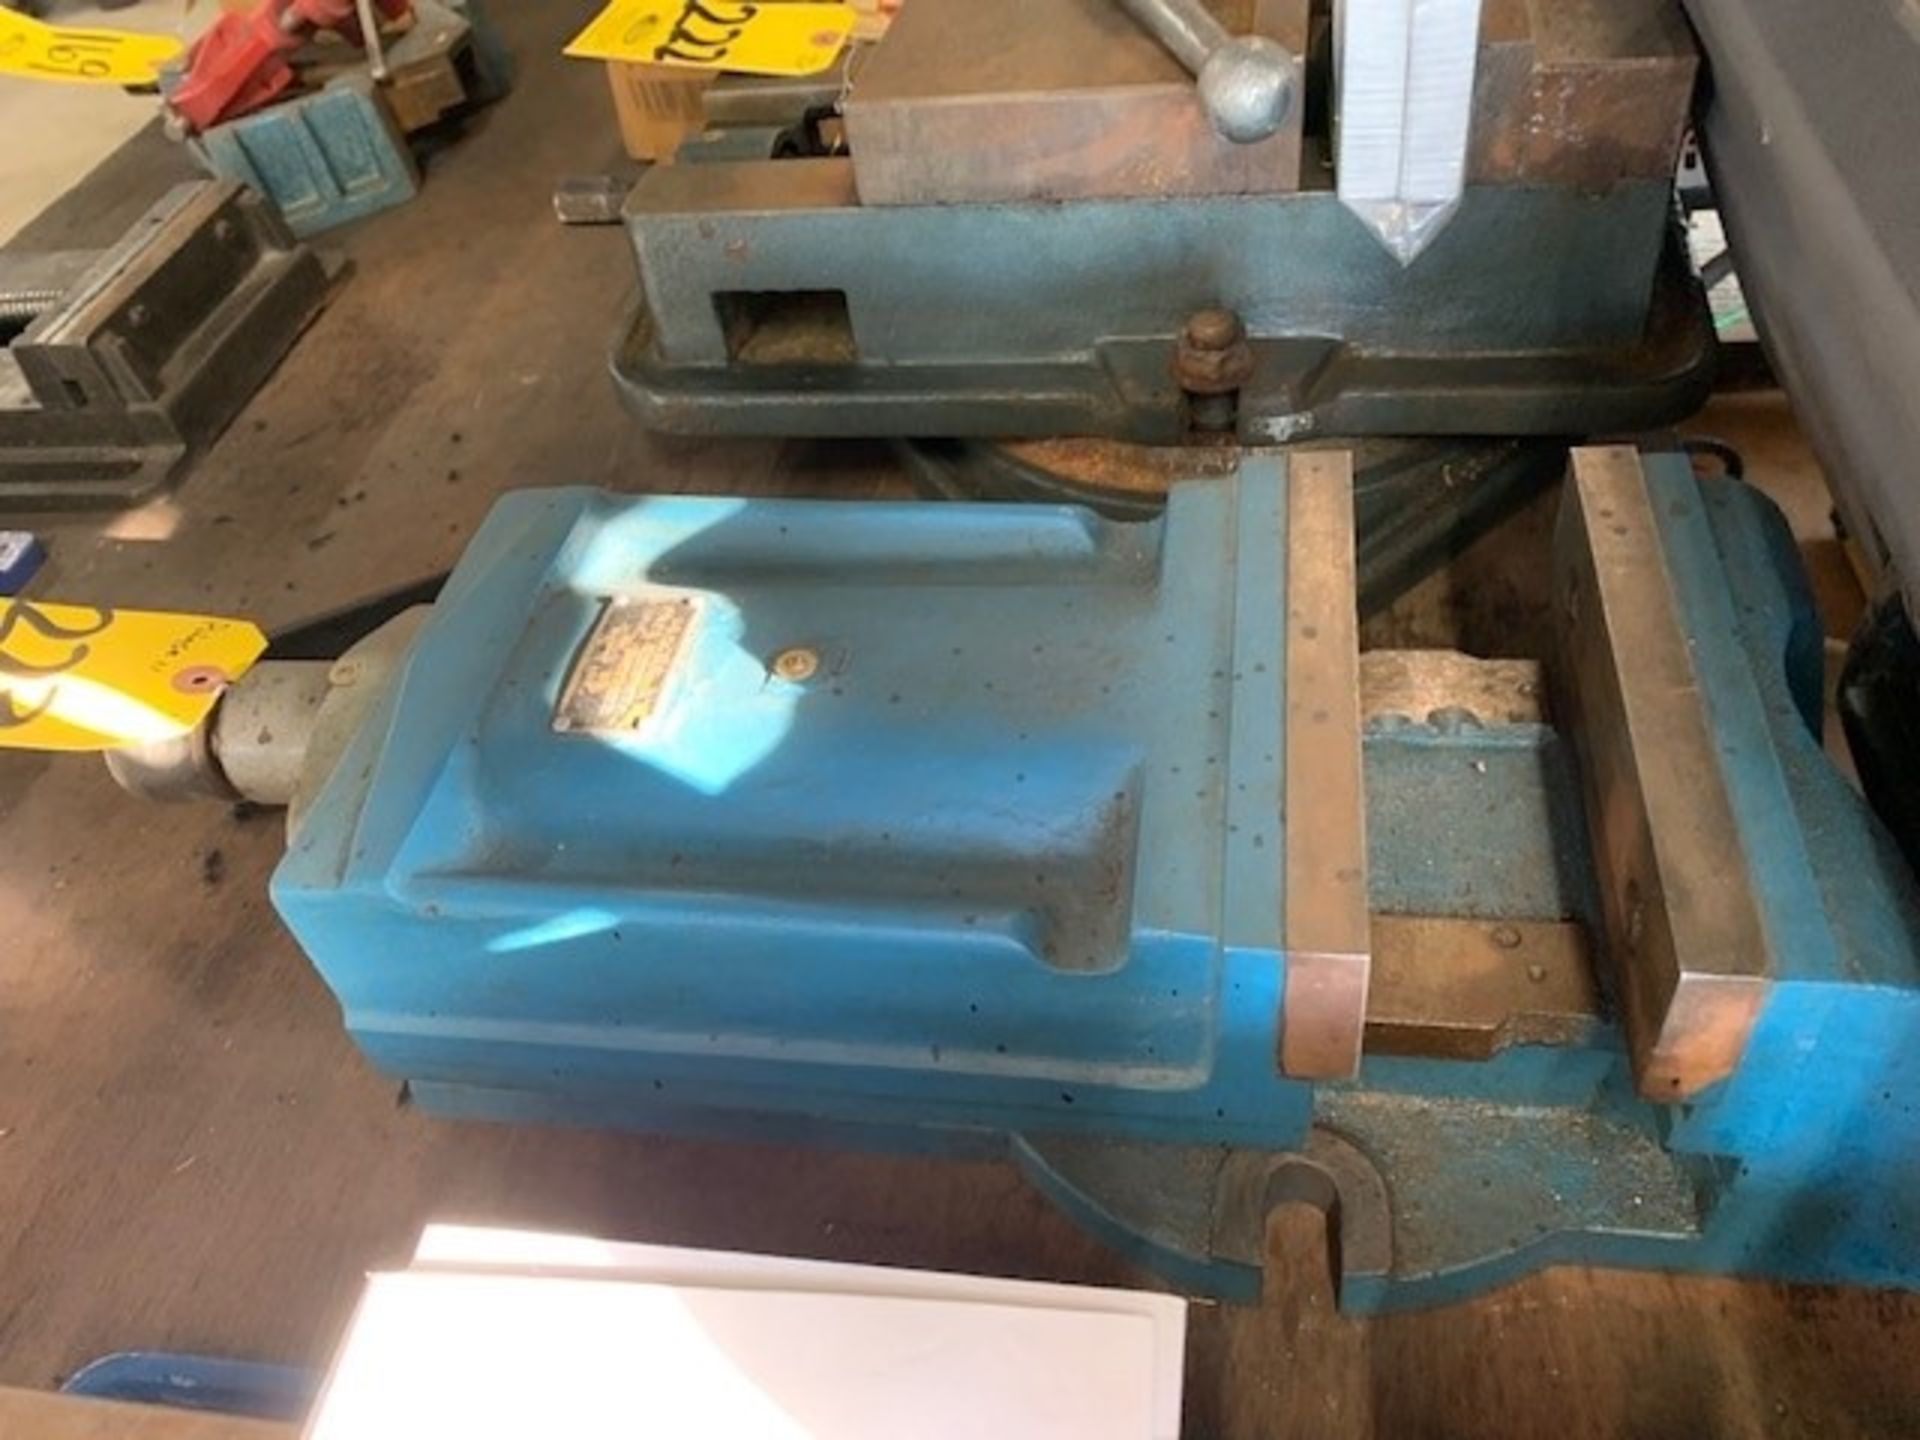 PHASE II NO. 235-006 6 IN. MILLING VISE - Image 3 of 3